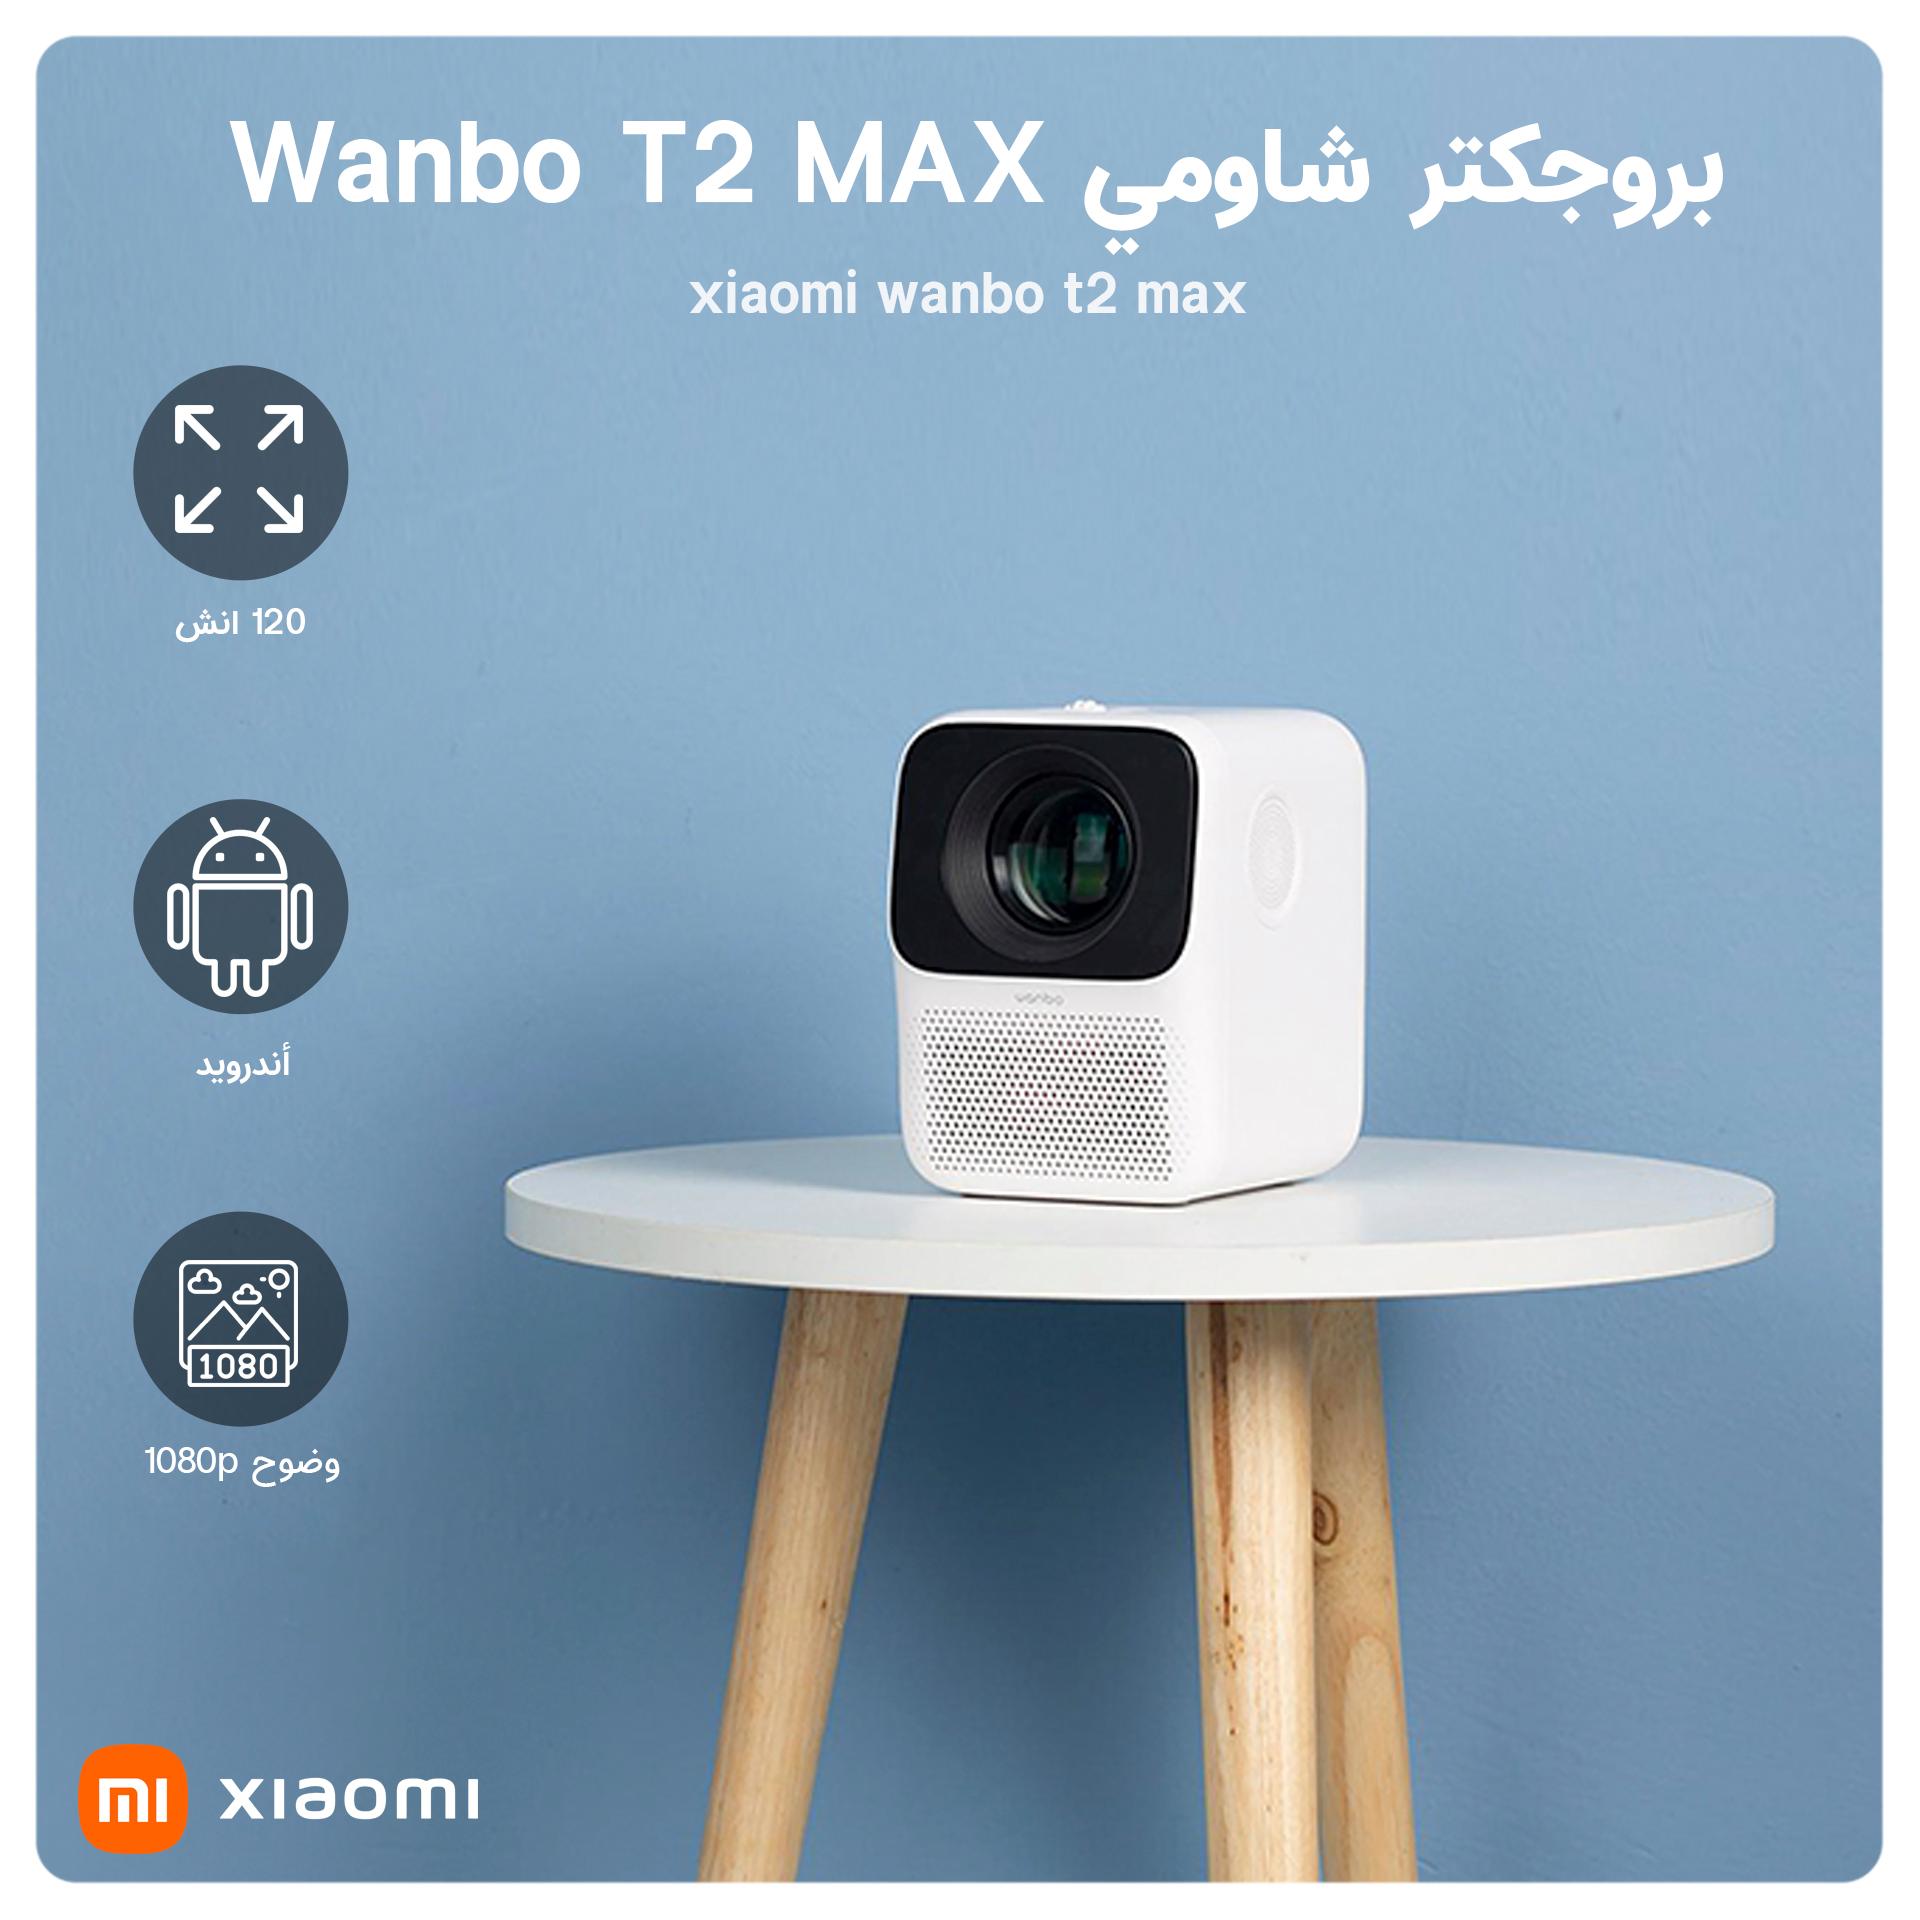 Xiaomi Wanbo T2 Max LCD Projector 1080P WIFI Android System 250 ANSI